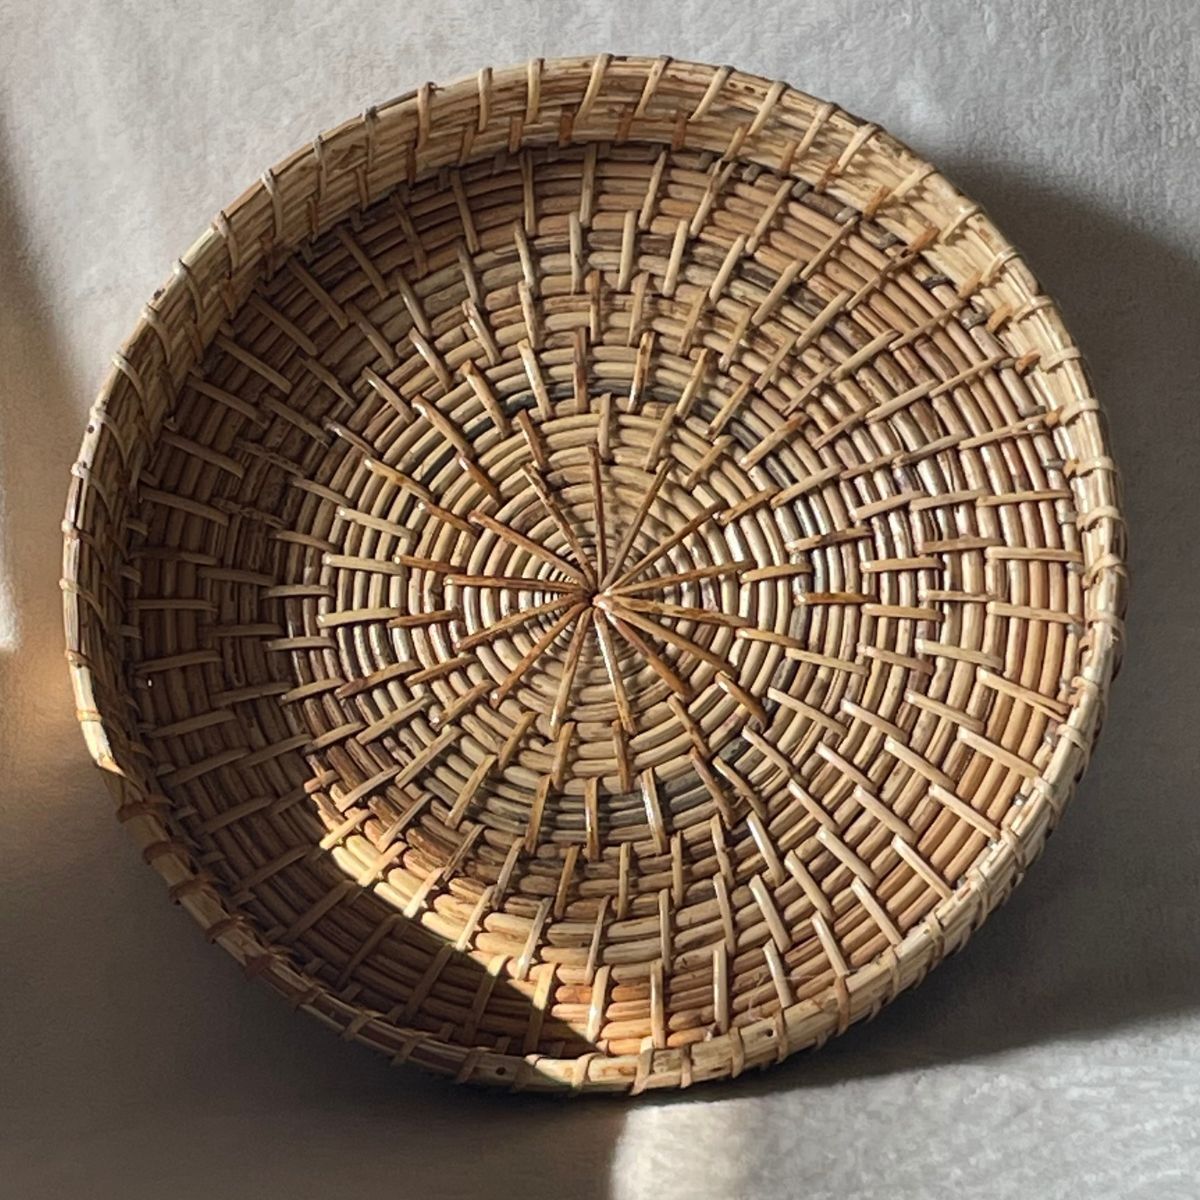 decorative trays online best serving trays set of 1 housewarming gift present new home decor bamboo rattan kitchen cane tray basket price